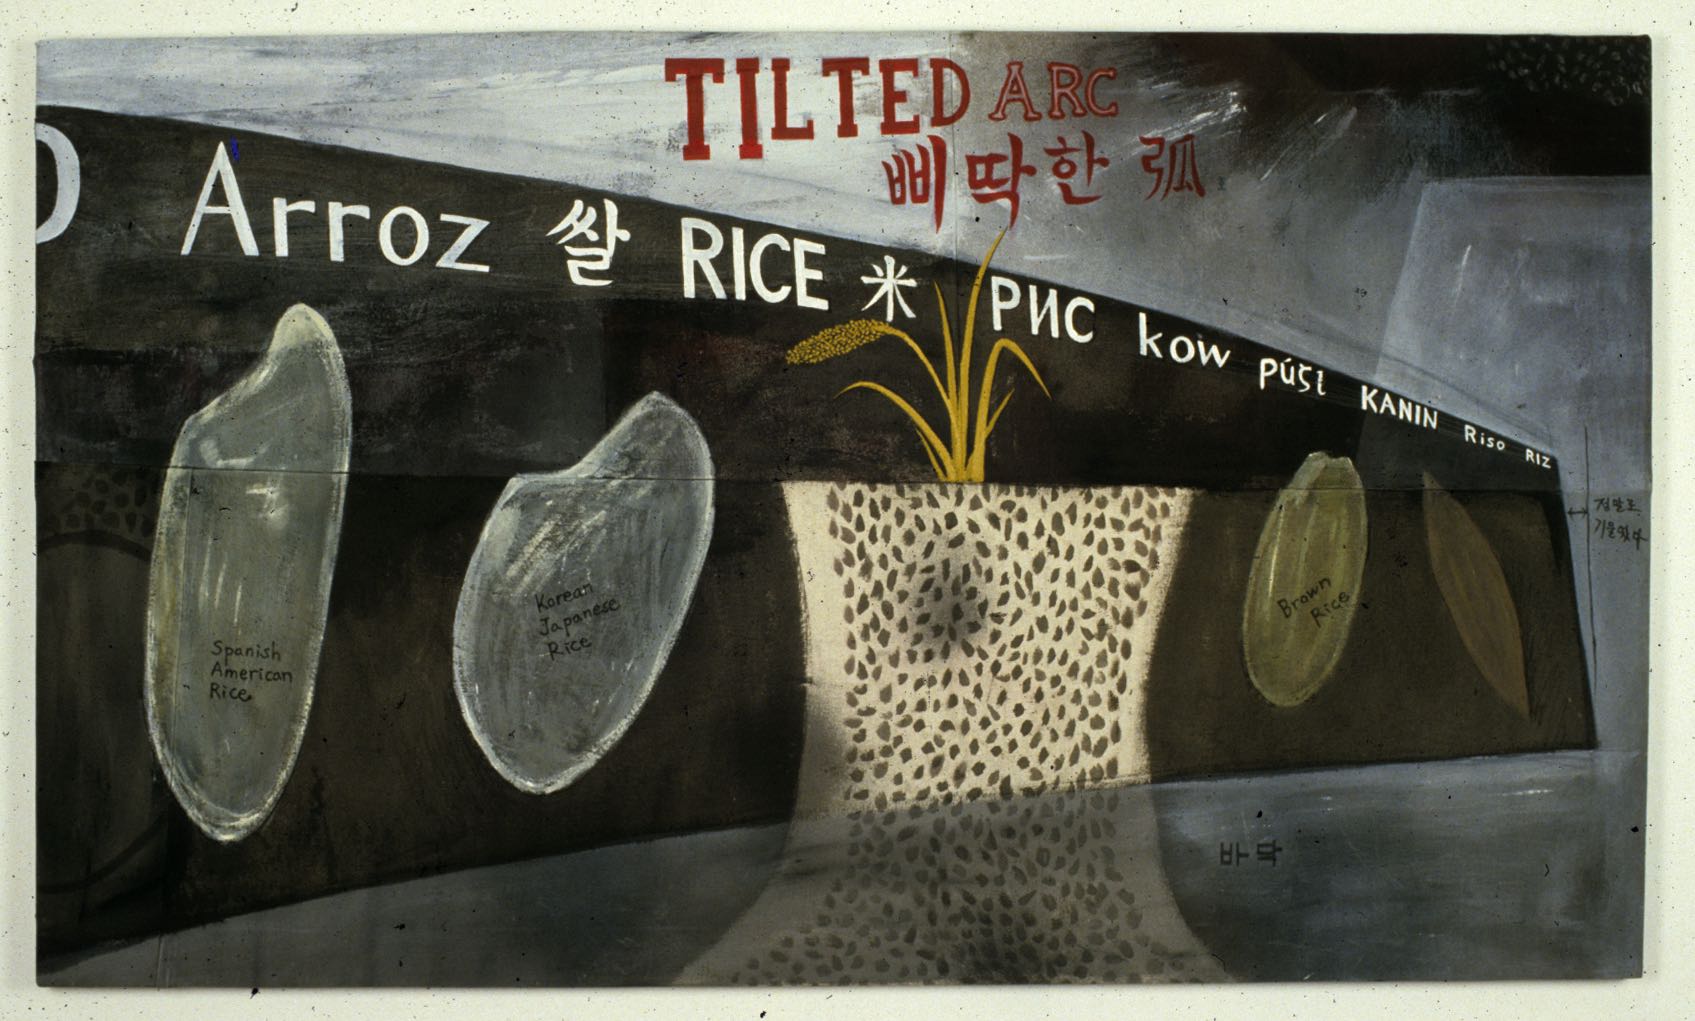 Rice Mural on Tilted Arc